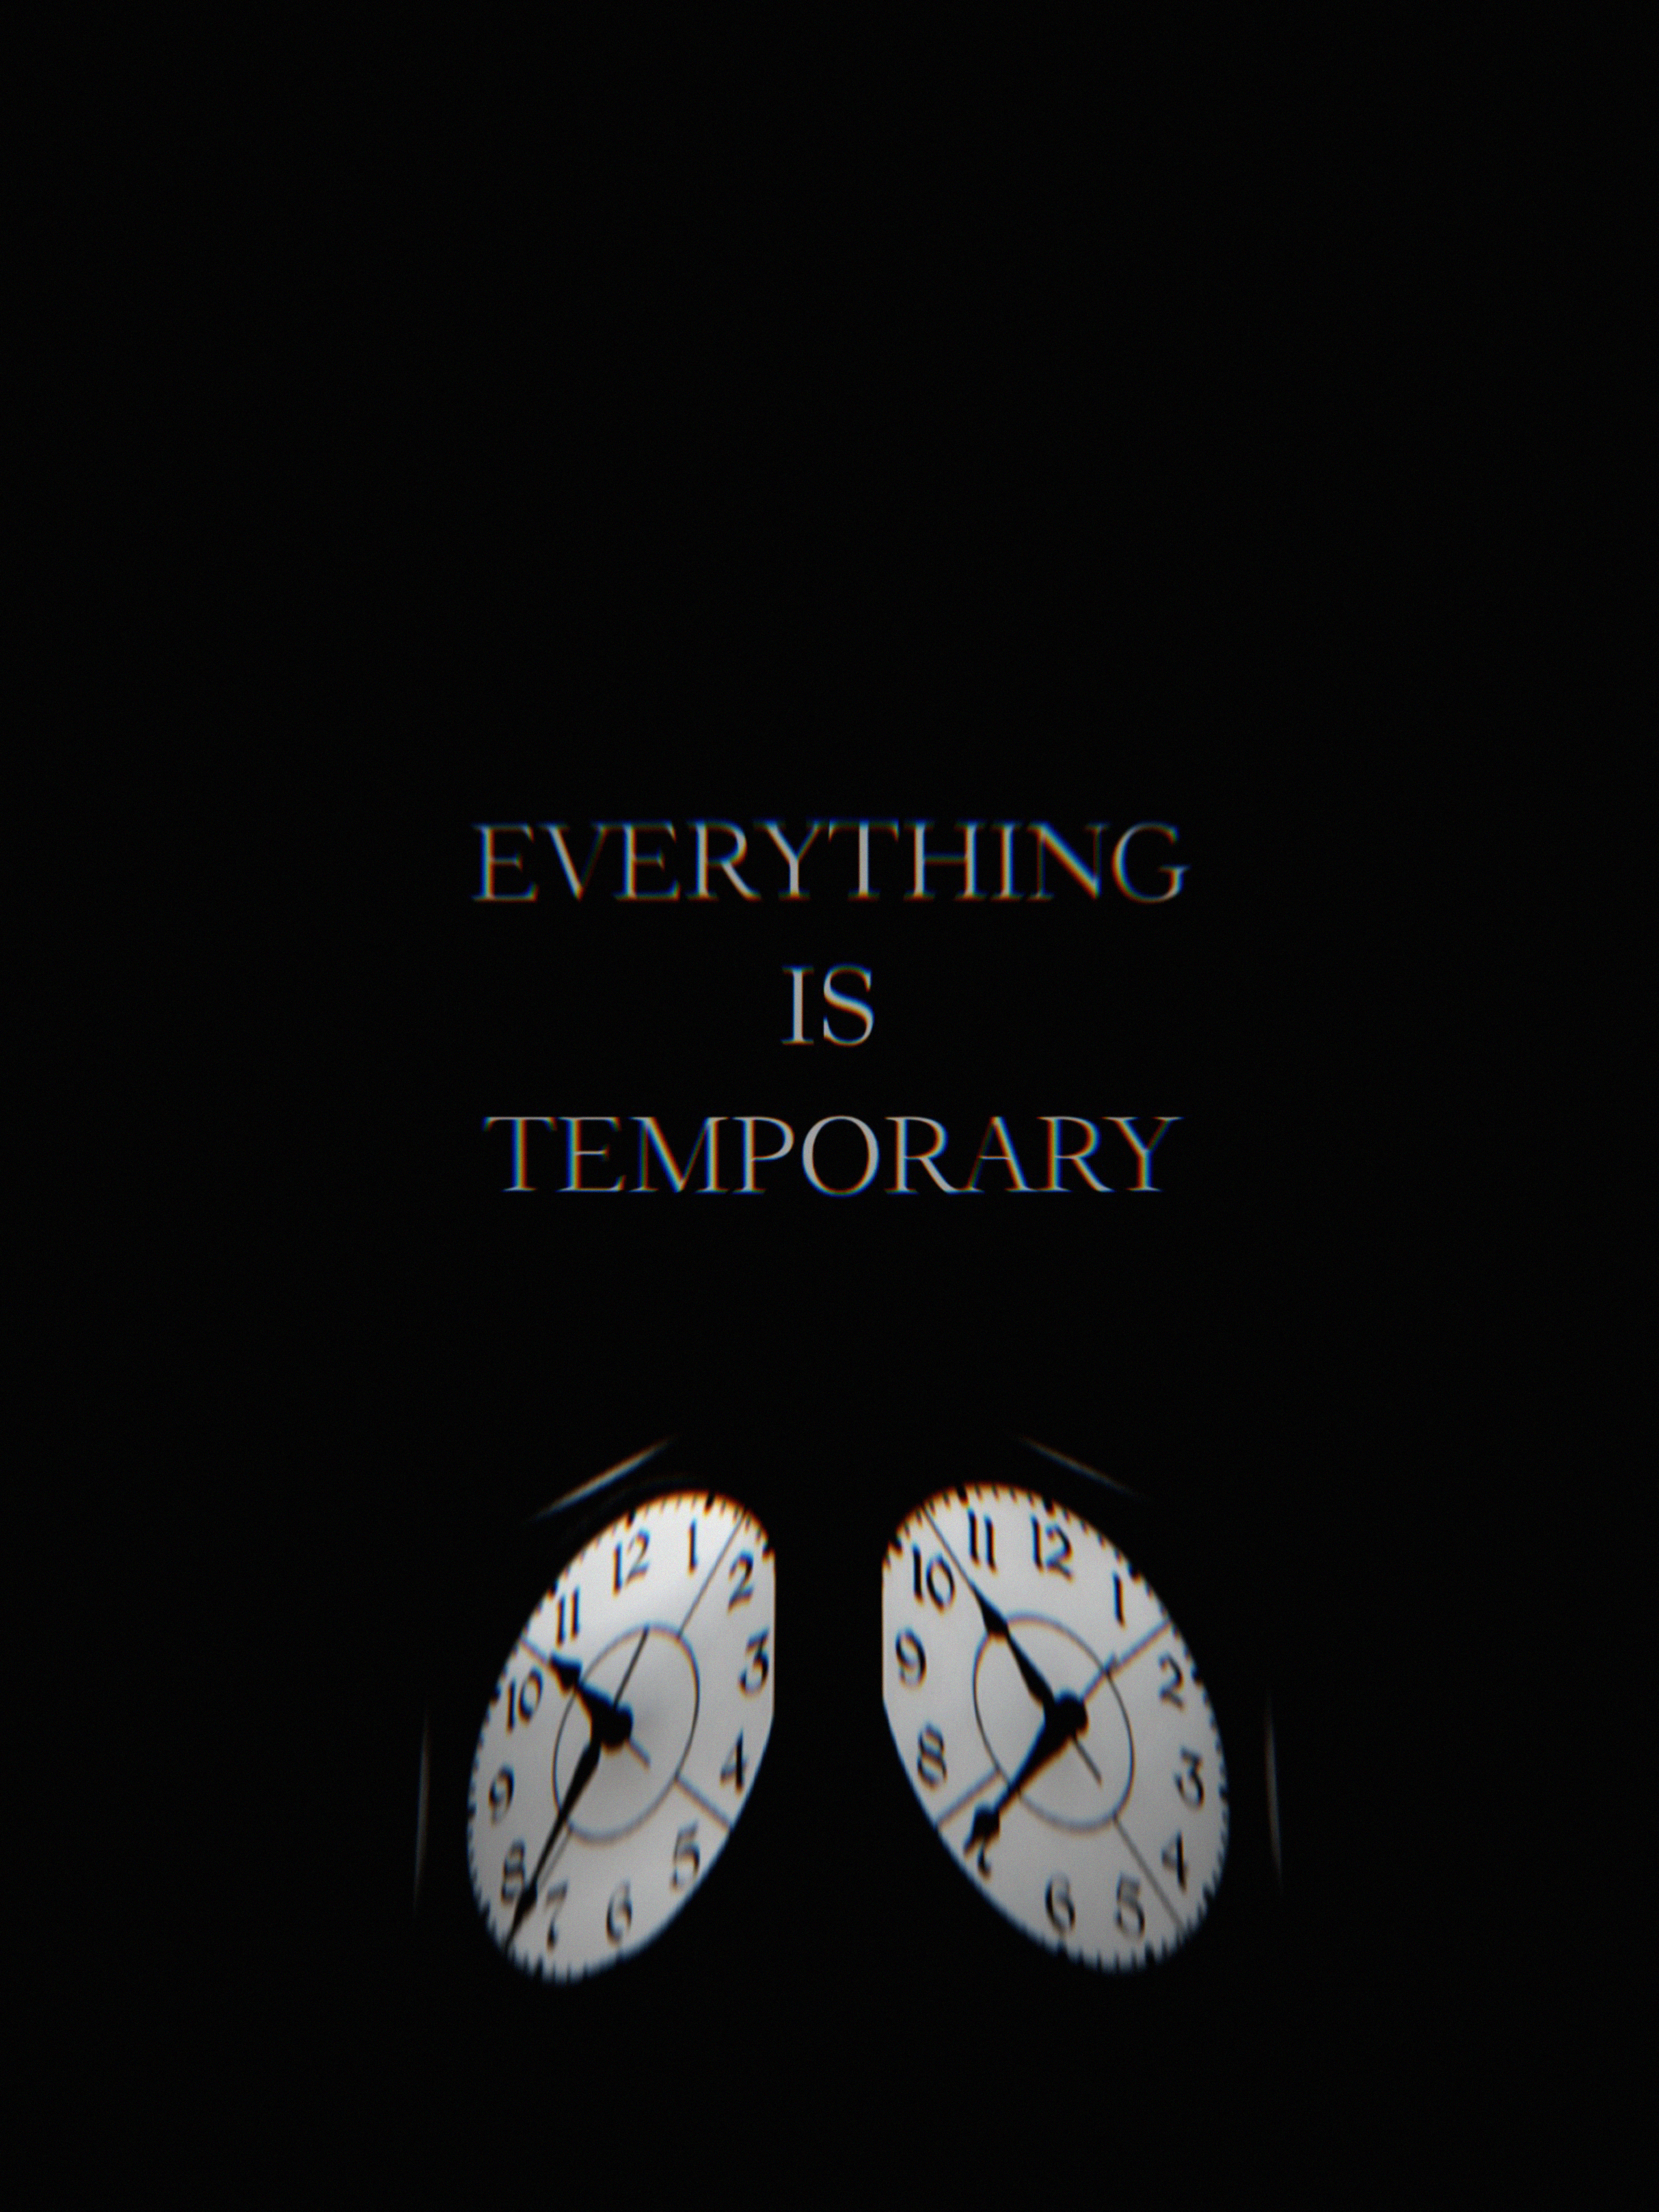 life, clock, words, glitch, time, it's time, temporary 2160p